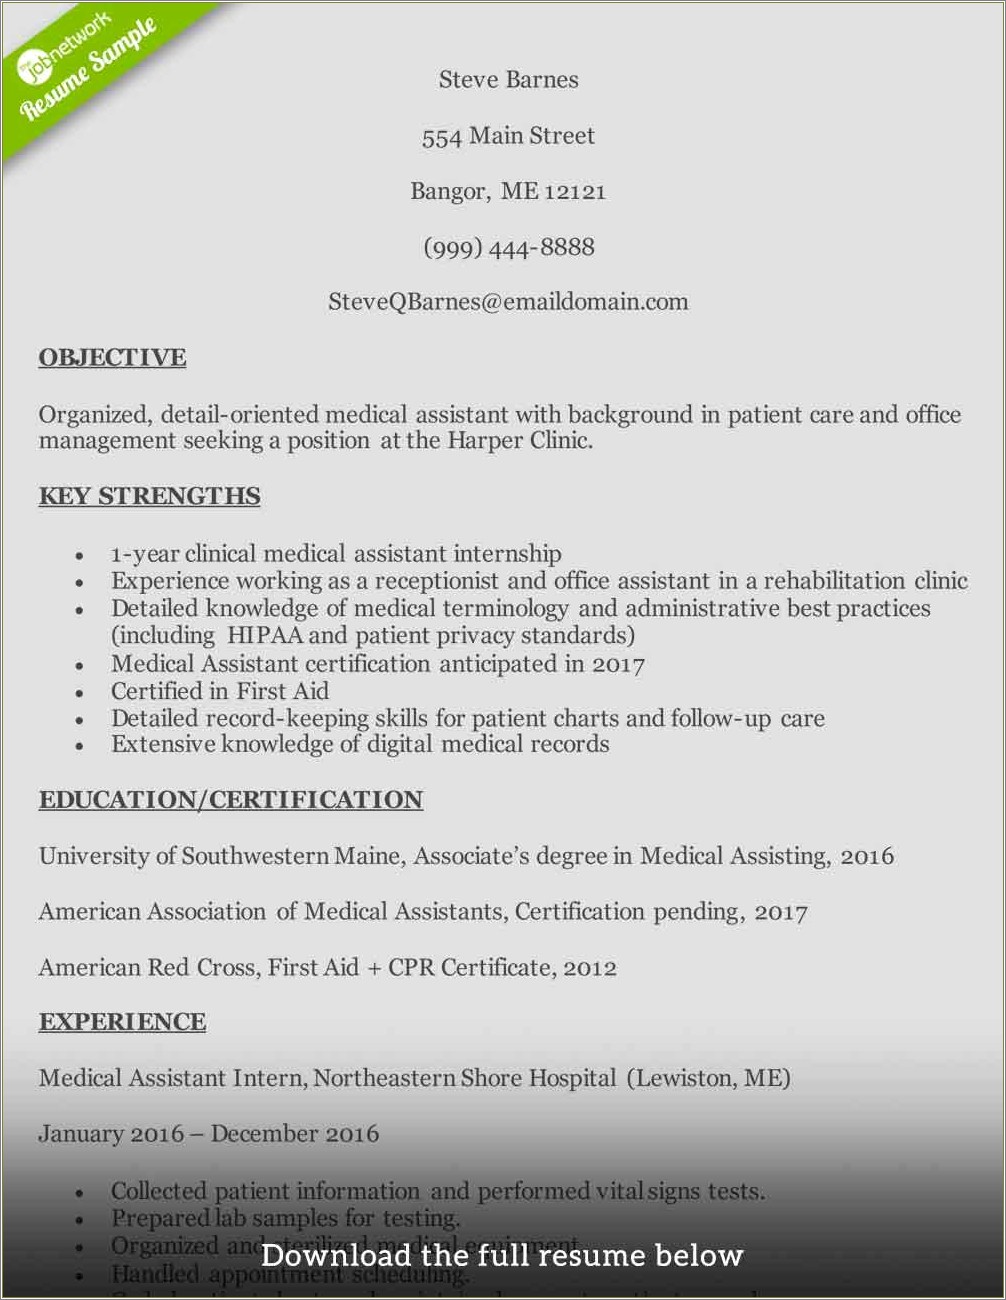 Resume For 12+ Years Of Work